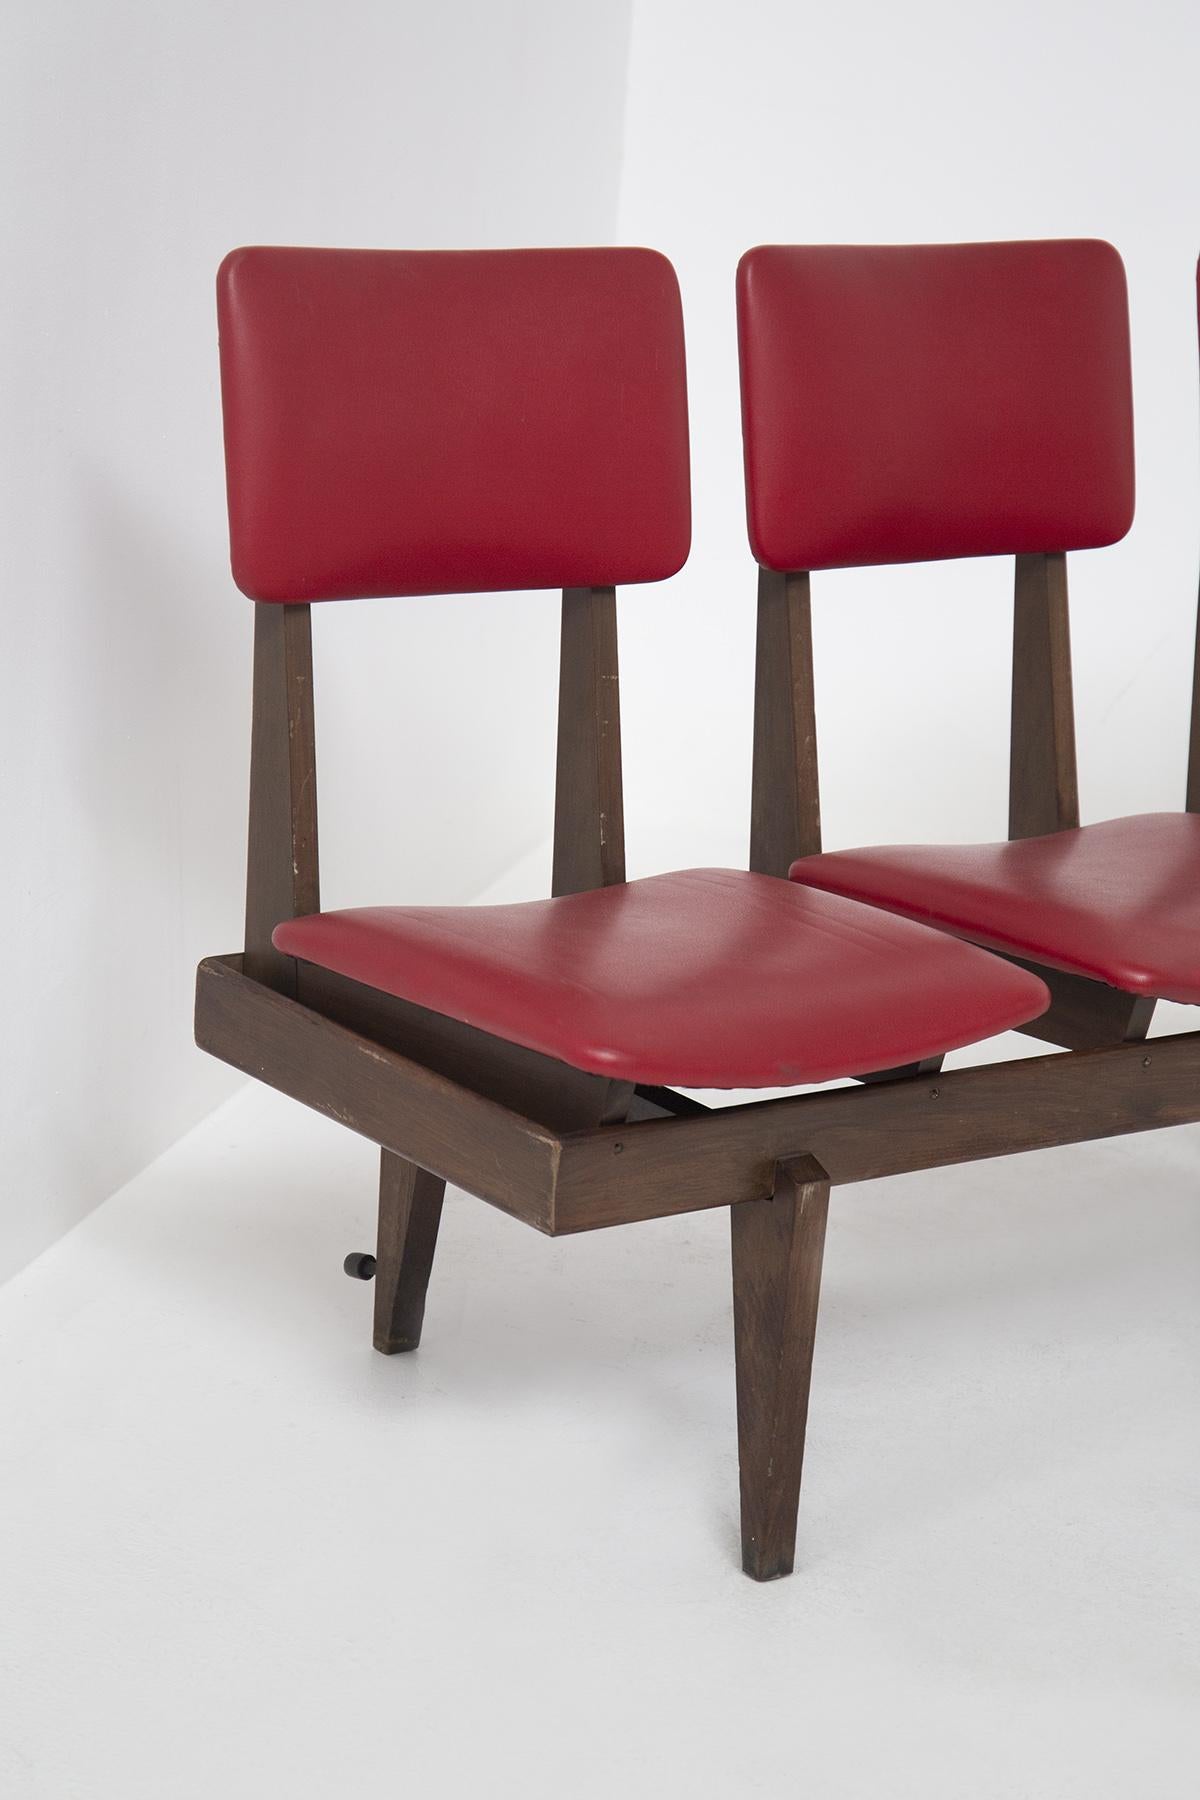 Mid-Century Modern Italian Vintage Bench with Red Leather Seats, 5 Seats For Sale